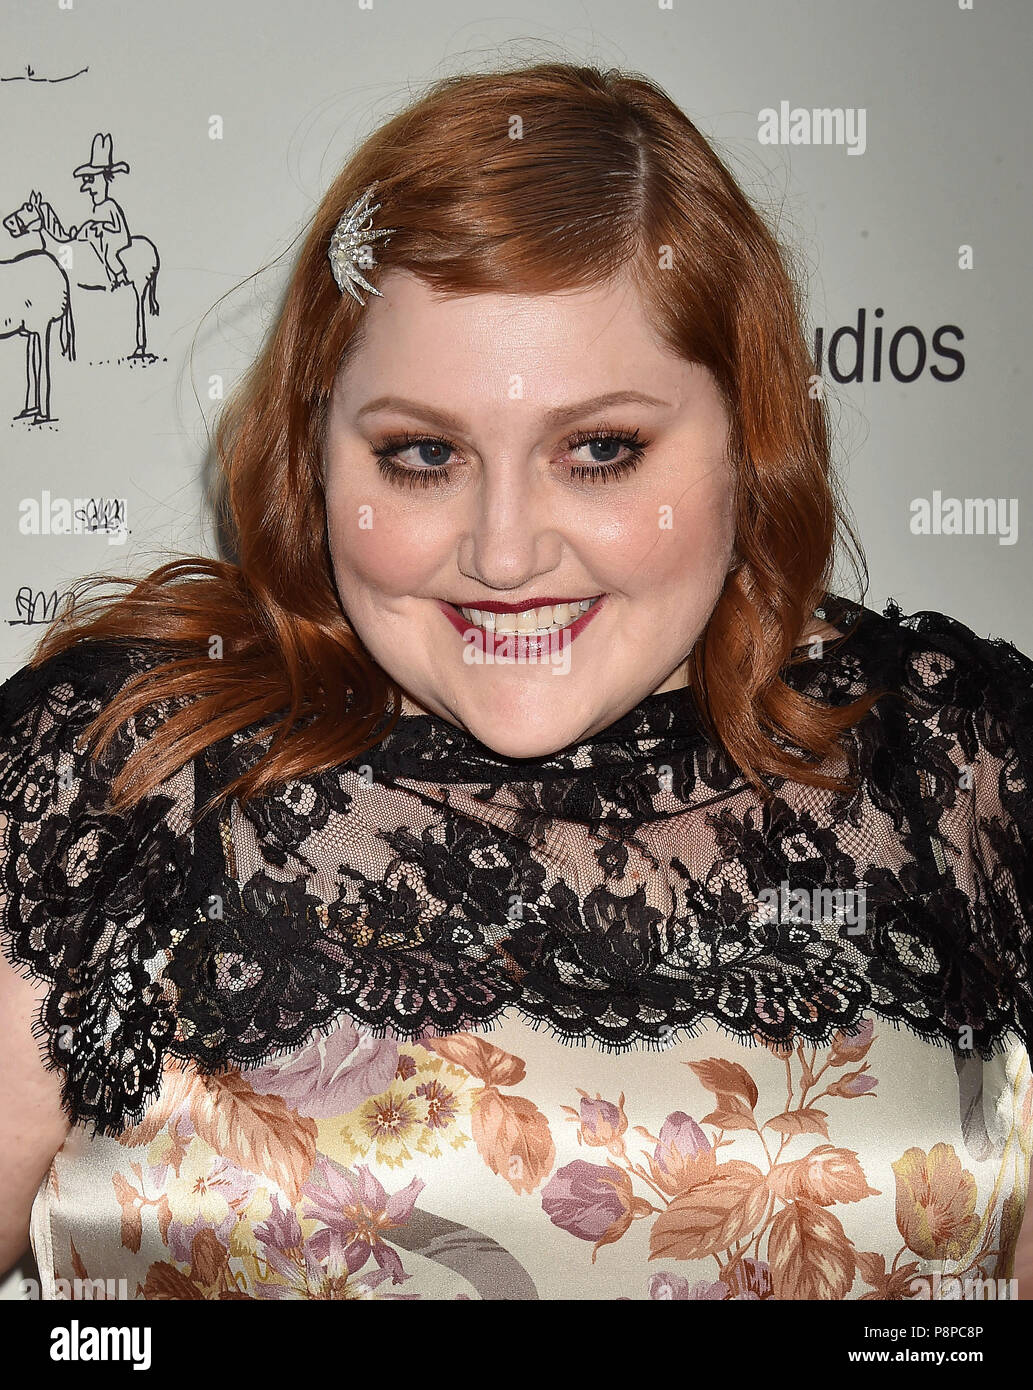 BETH DITTO American singer at the premiere of 'Don't Worry, He Wont Get Far On Foot' at ArcLight Hollywood on July 11, 2018 in Hollywood, California. Photo: Jeffrey Mayer Stock Photo